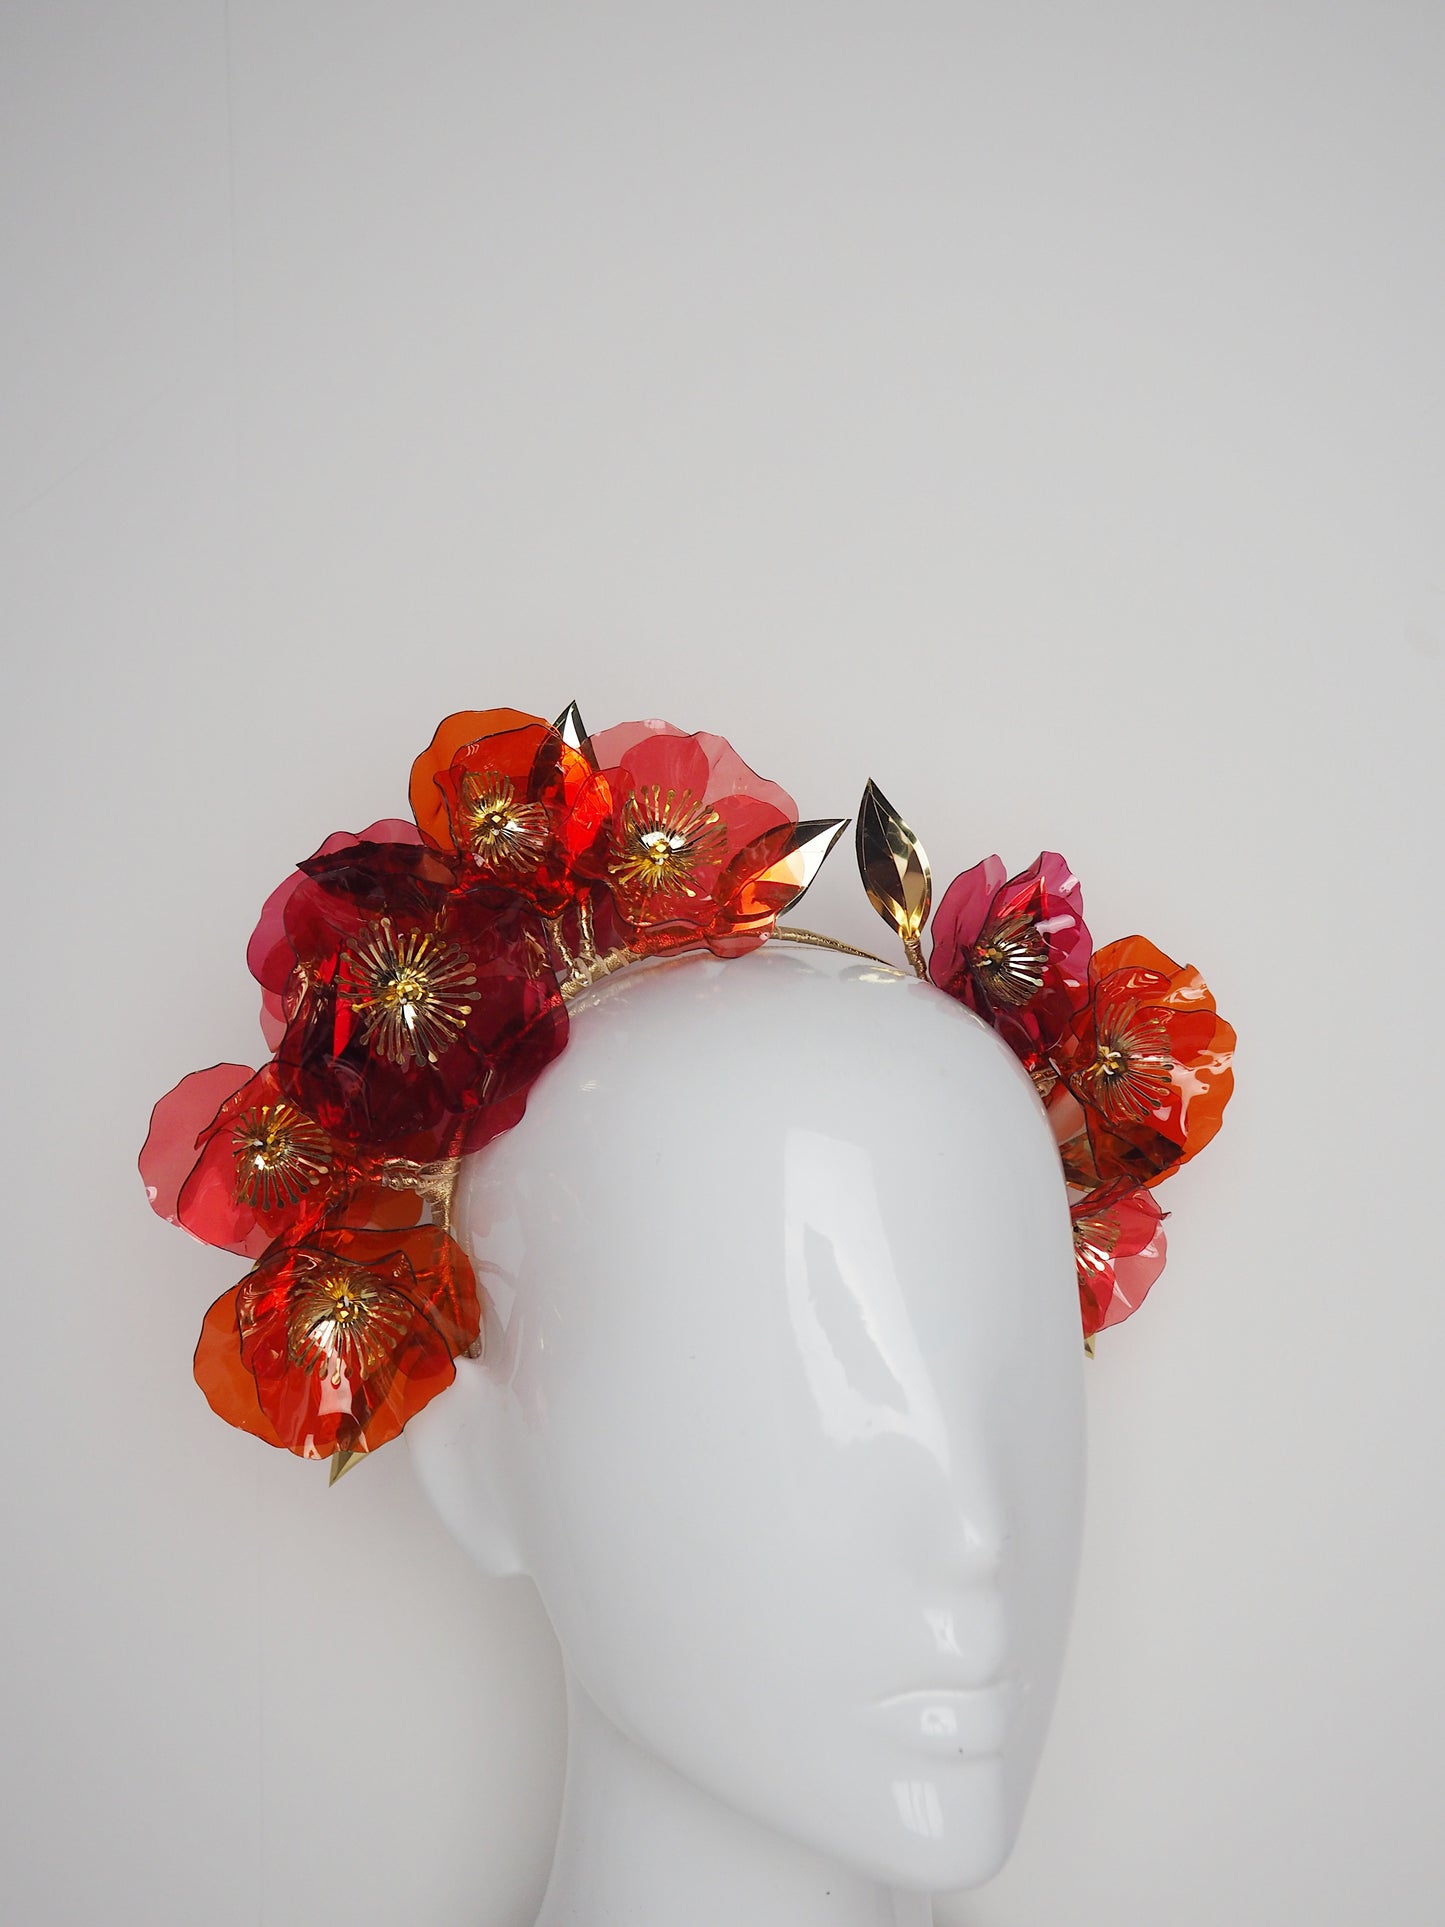 Popping Poppies - Crystoform poppies in shades of red and rust with gold accents